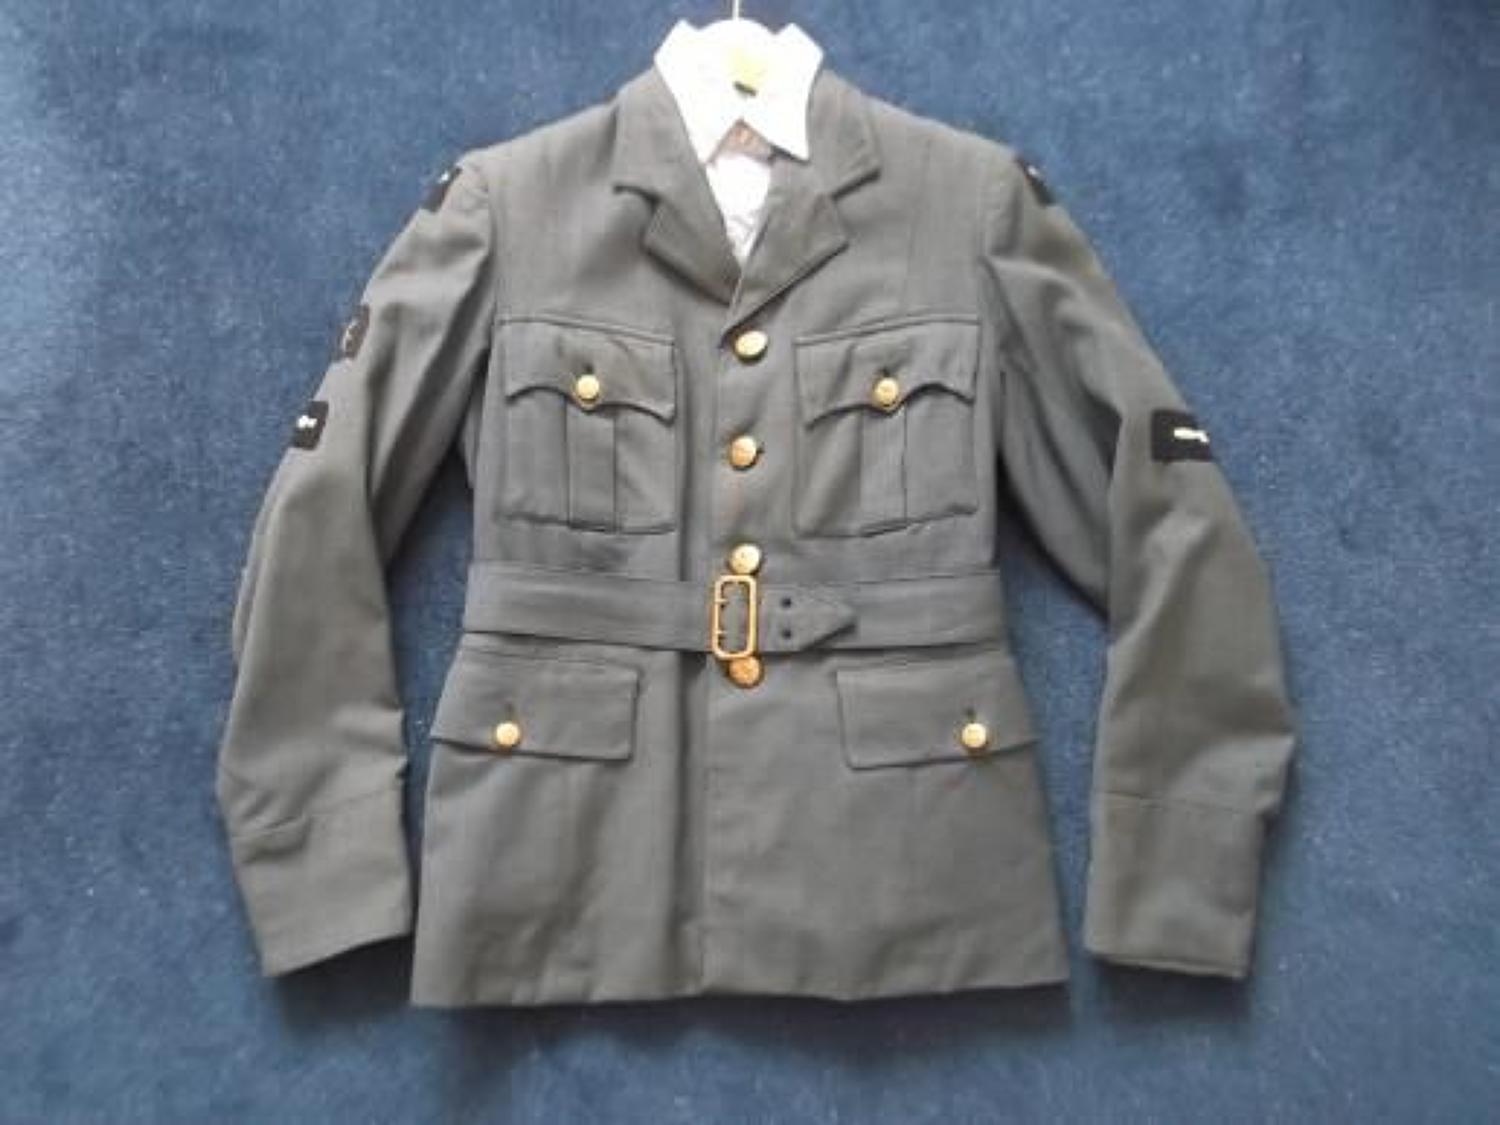 1939 dated Other Ranks WW2 RAF / WAAF tunic & Blouse.